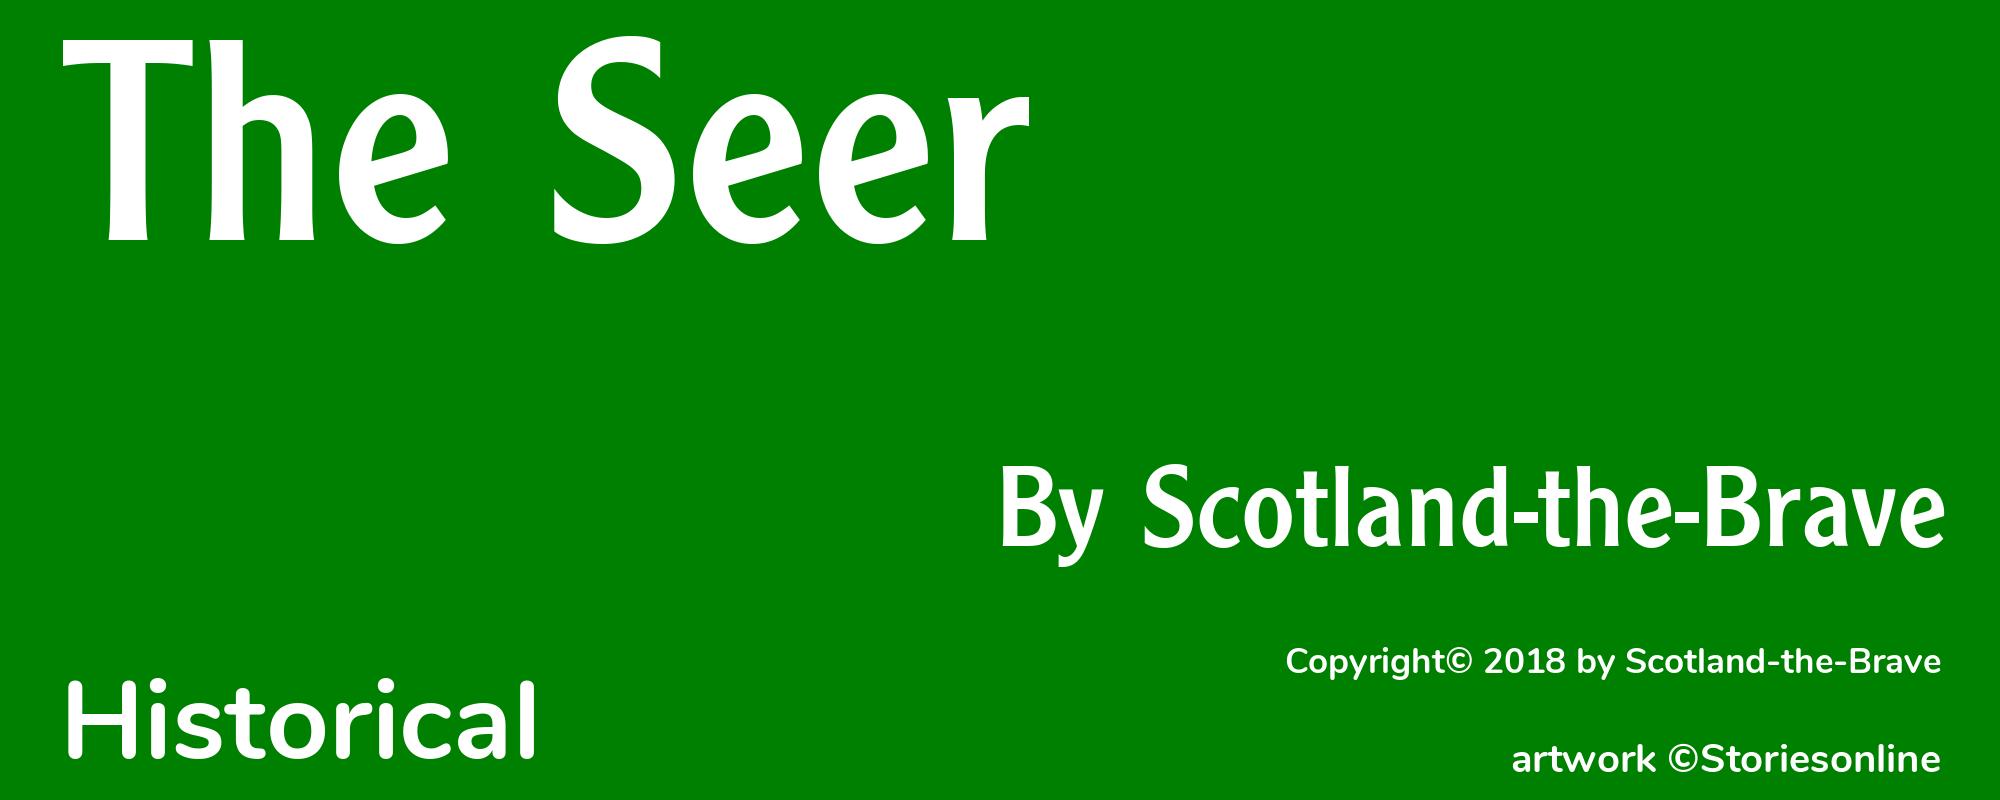 The Seer - Cover